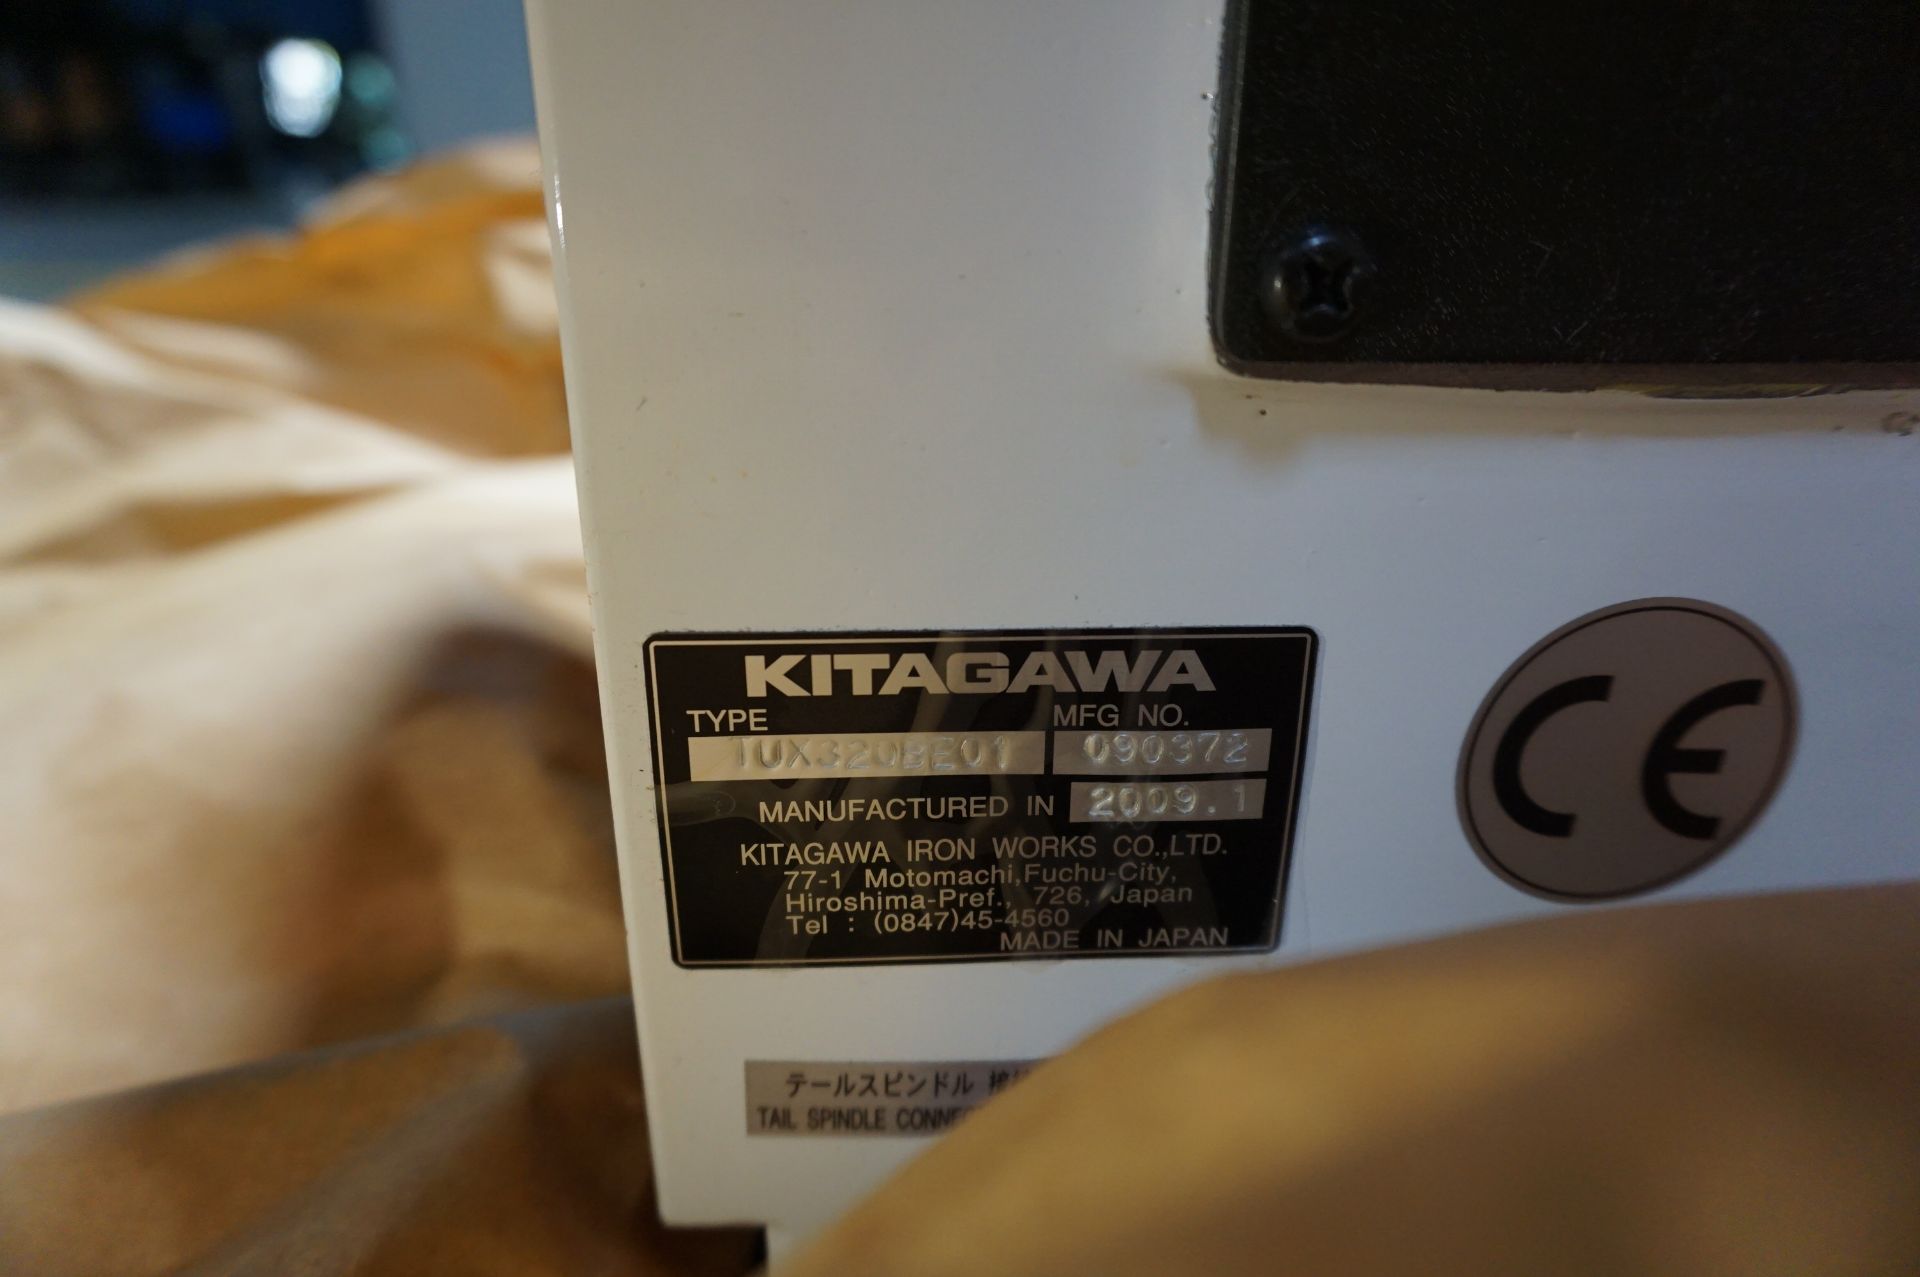 NEVER USED IN ORIGINAL BOX - 2009 KITIGAWA TUX320BE01 4TH AXIS ROTARY TABLE S/N 090372 - Image 8 of 8